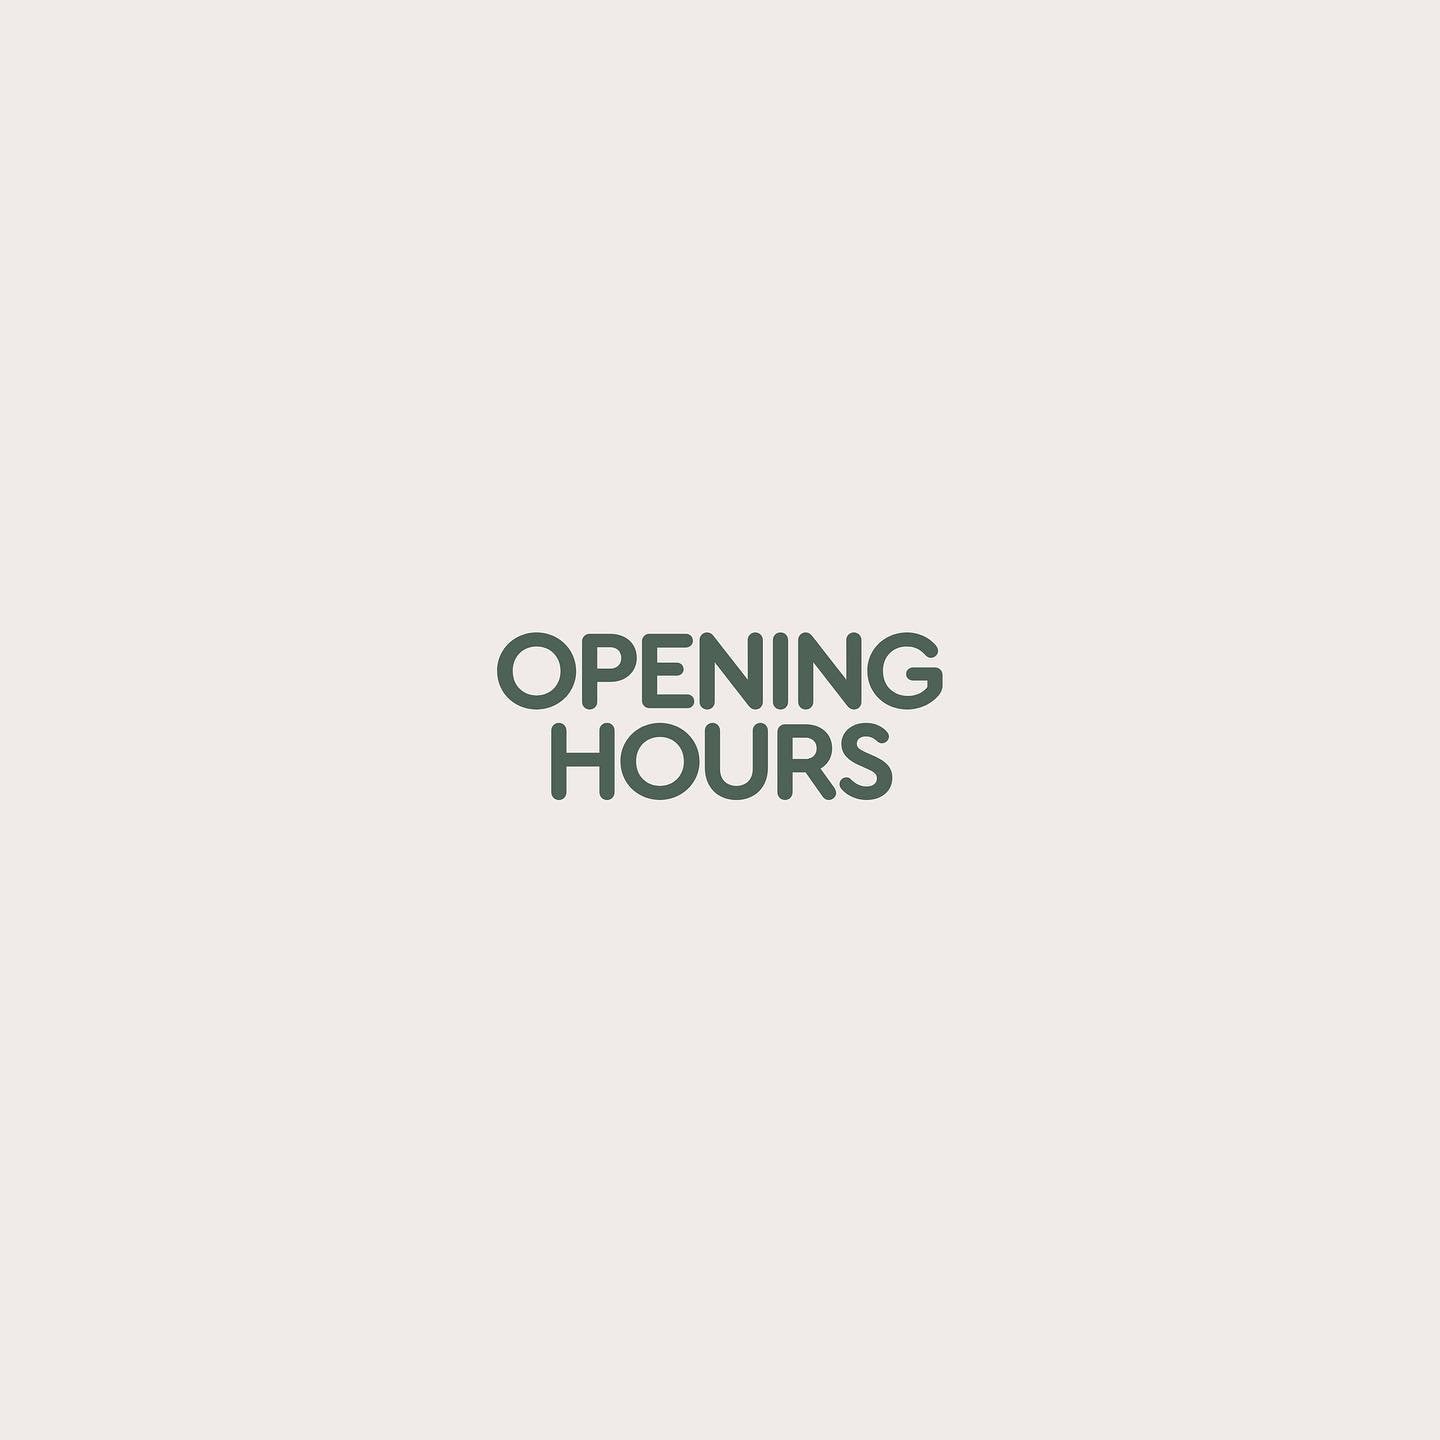 Opening Hours 🕐

Swipe to check out our new opening hours 

#wellnesszone #wellness #papamoa